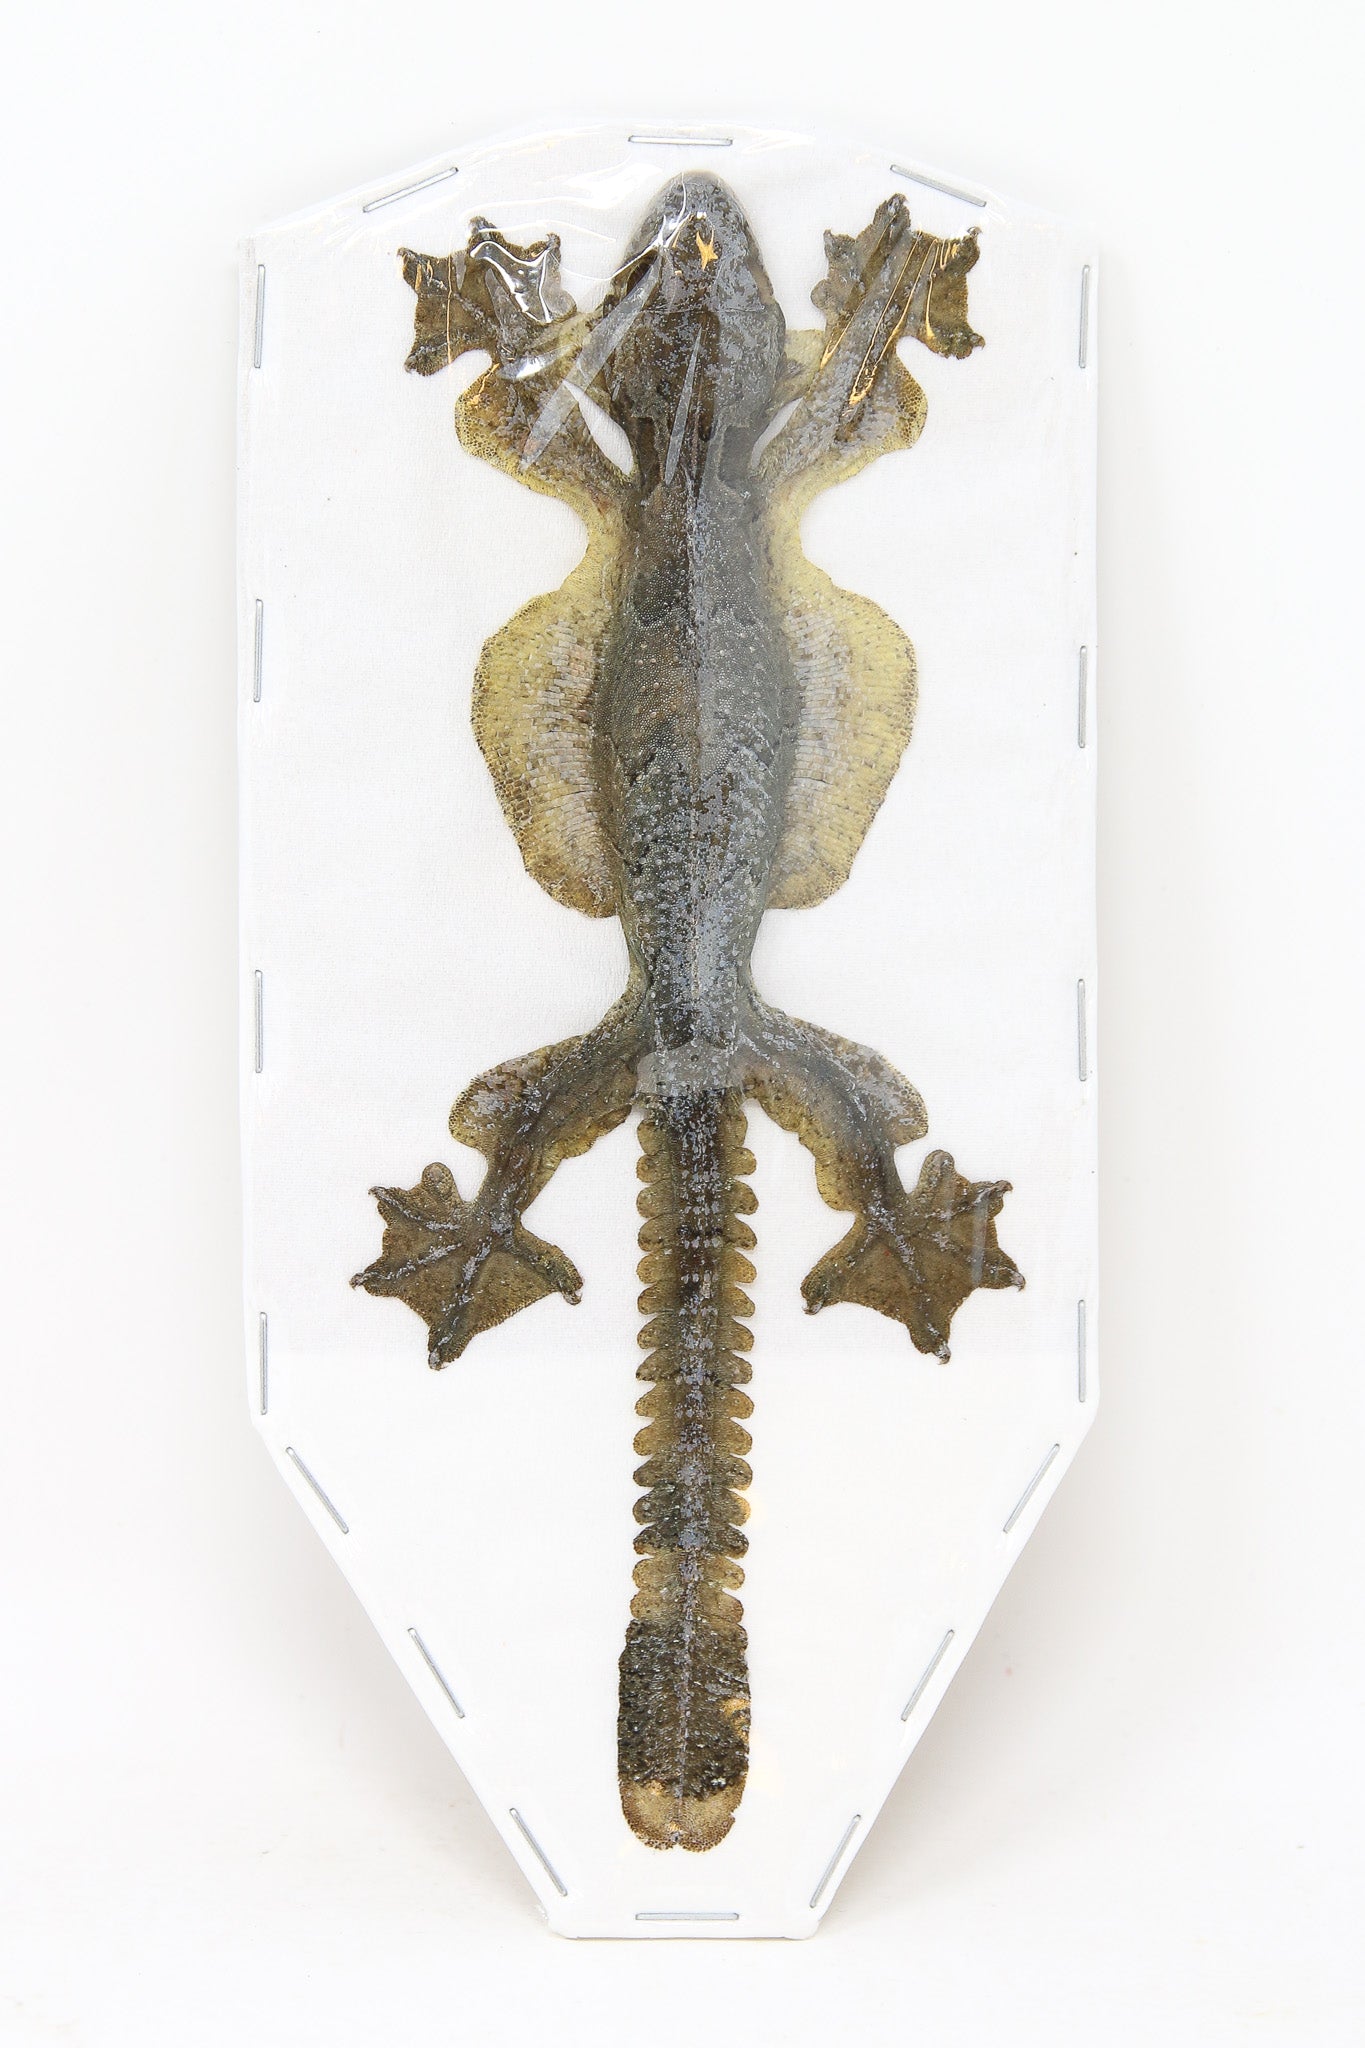 Kuhl's Flying Gecko | Ptychozoon kuhli | Dry-preserved spread specimens for framing, collecting, studying